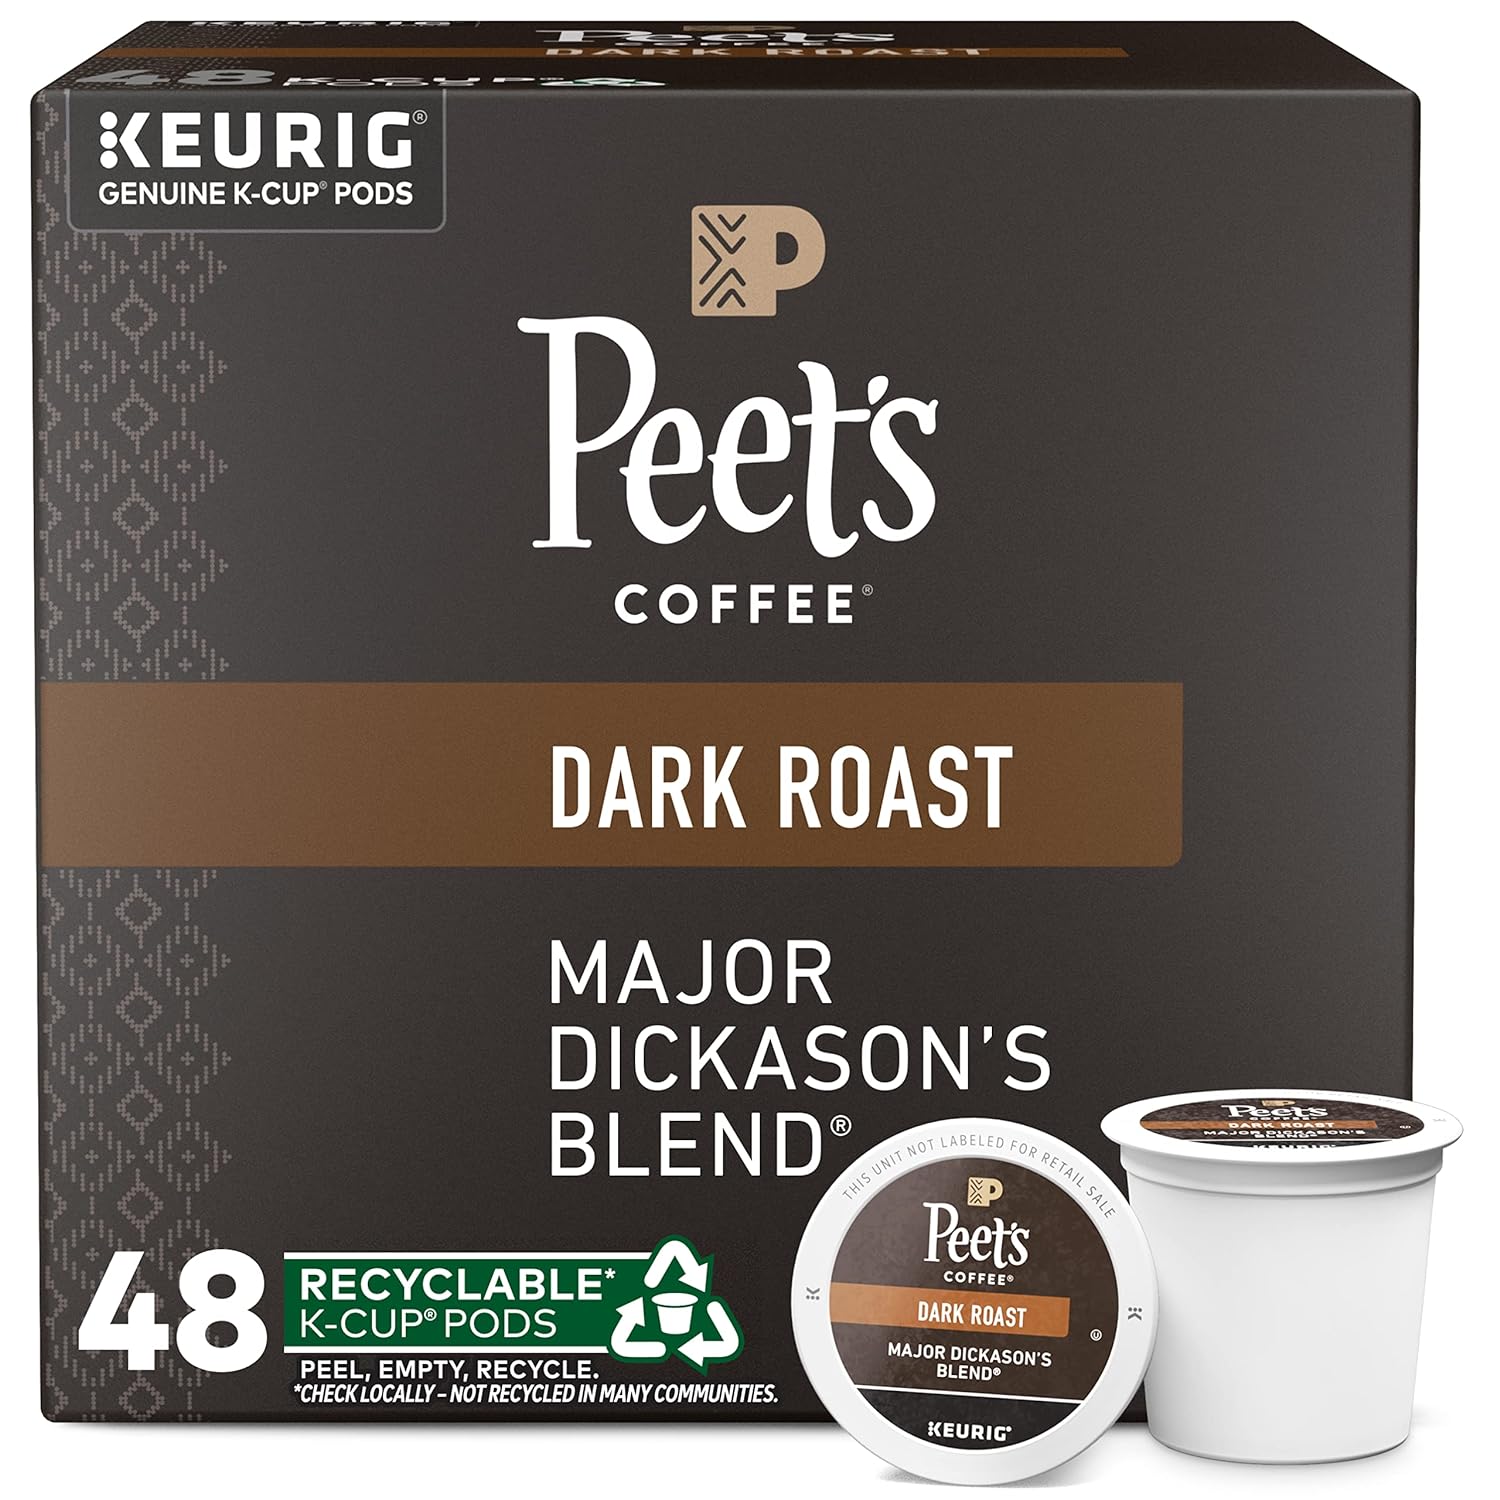 Peet's Coffee, Dark Roast K-Cup Pods for Keurig Brewers - Major Dickason's Blend 48 Count (1 Box of 48 K-Cup Pods)